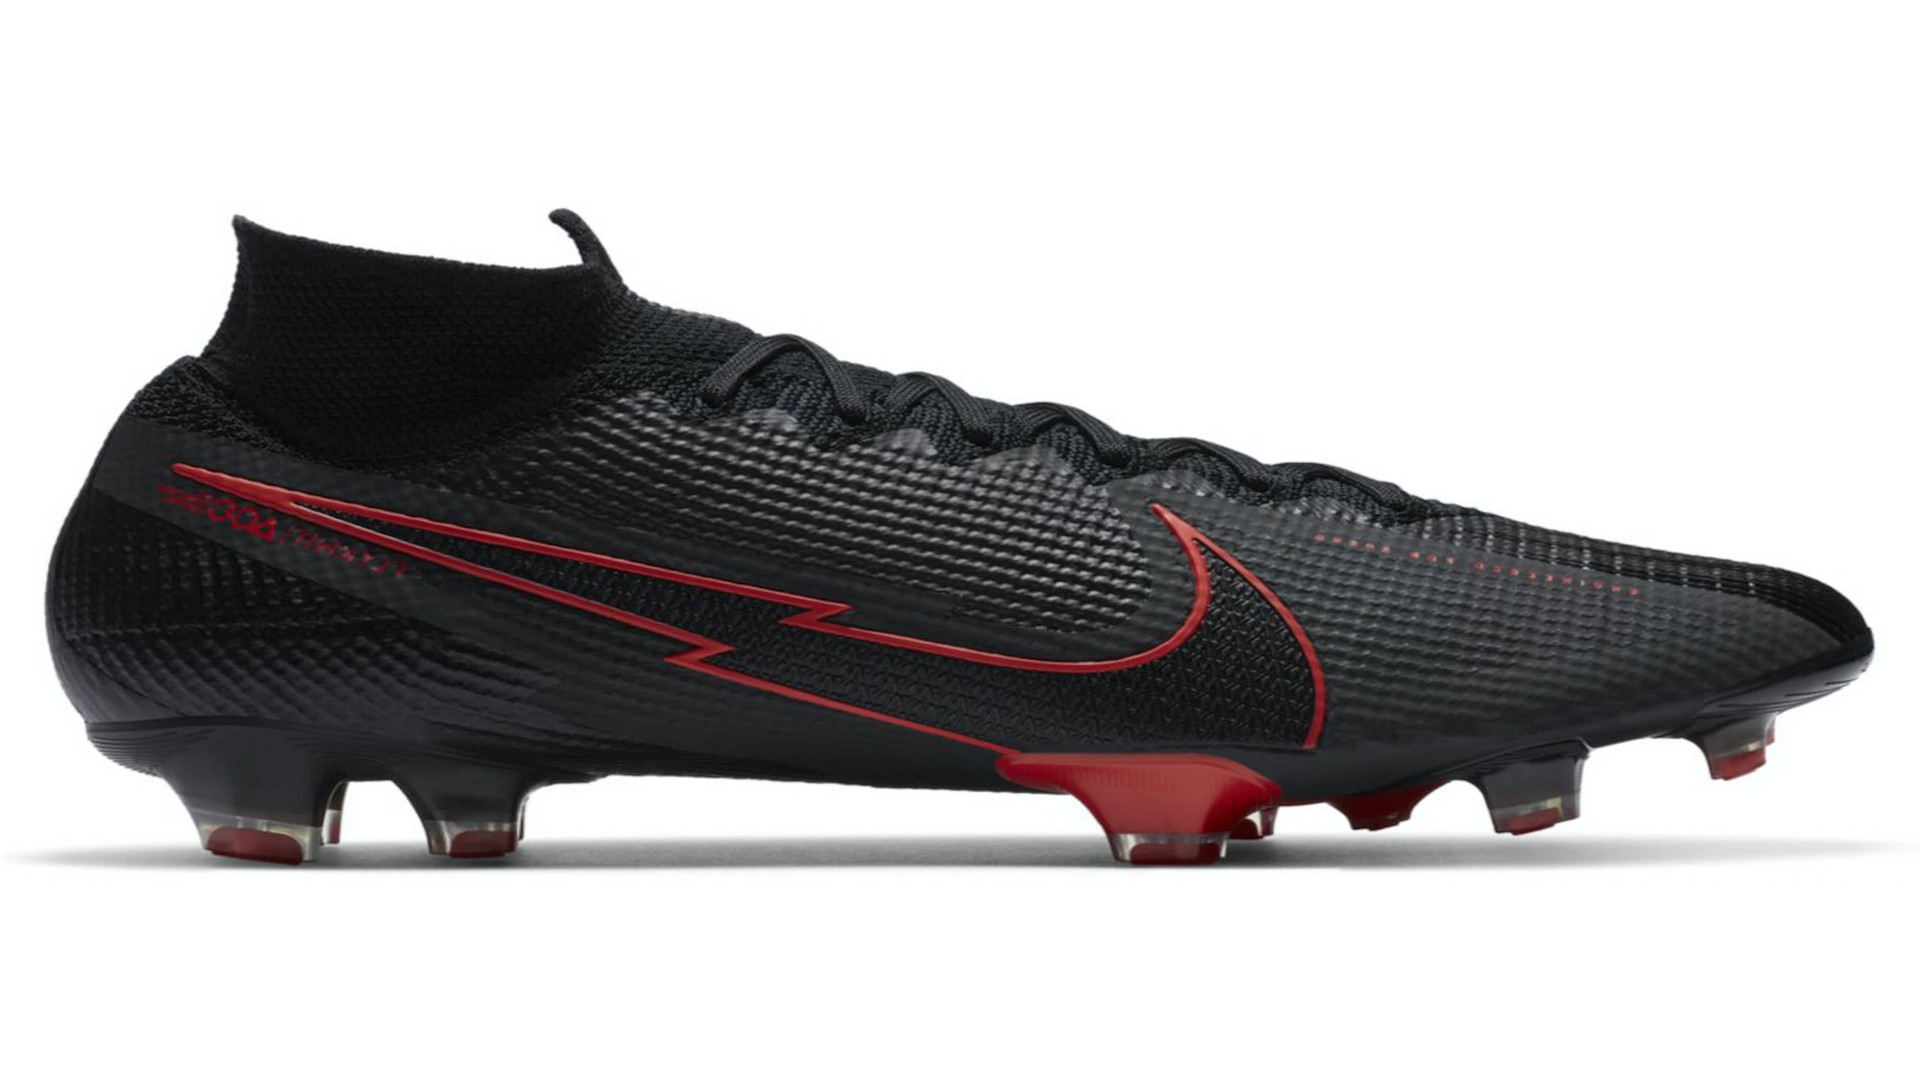 Nike Mercurial Superfly 7 Elite FG Soccer Cleats – $275